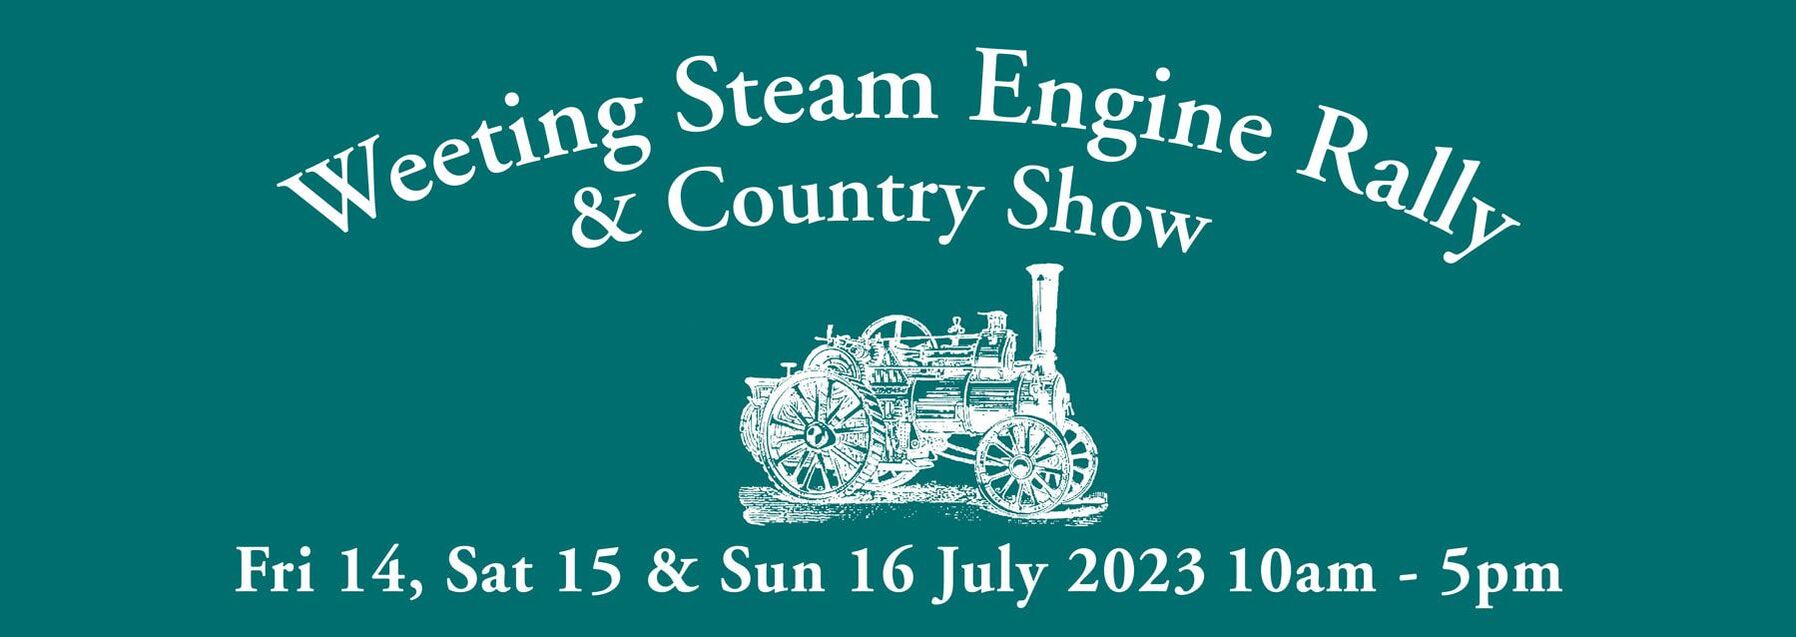 Weeting Steam Engine Rally